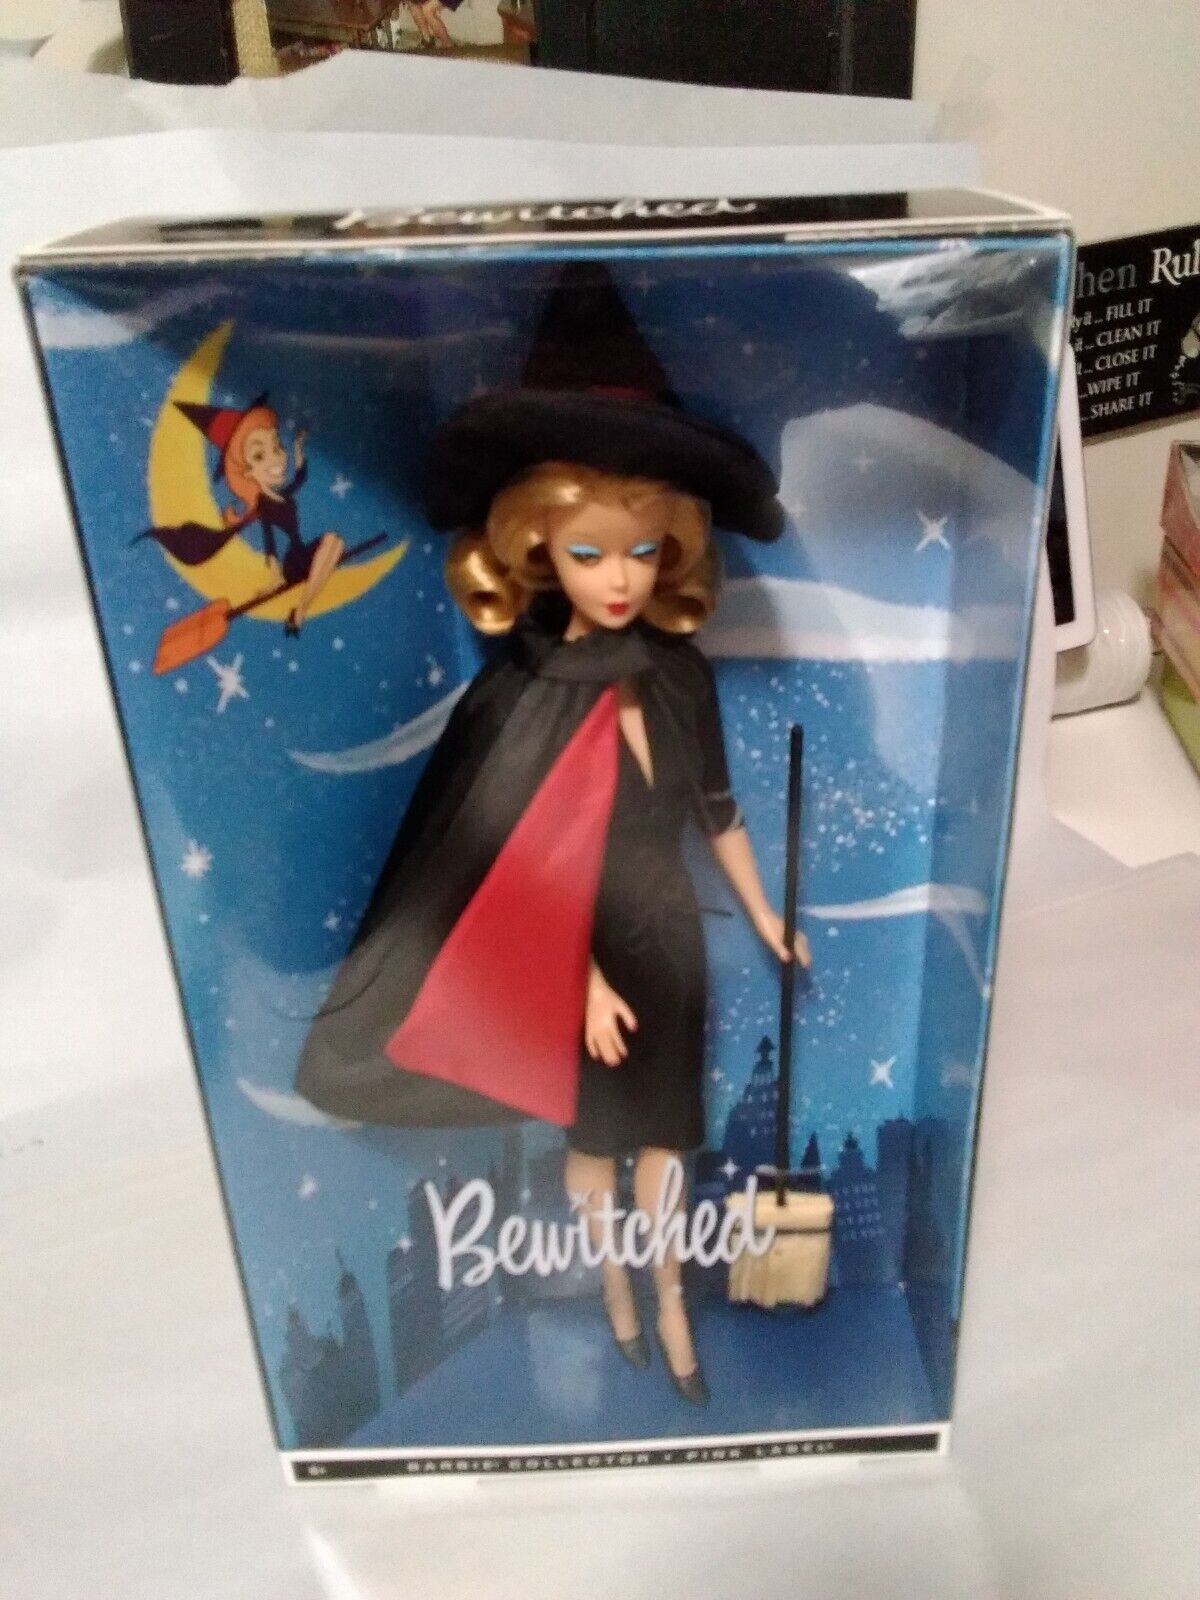 🌟🌟BARBIE BEWITCHED PINK LABEL 2010 DOLL AND BOX SUPER MINT CONDITION HTF